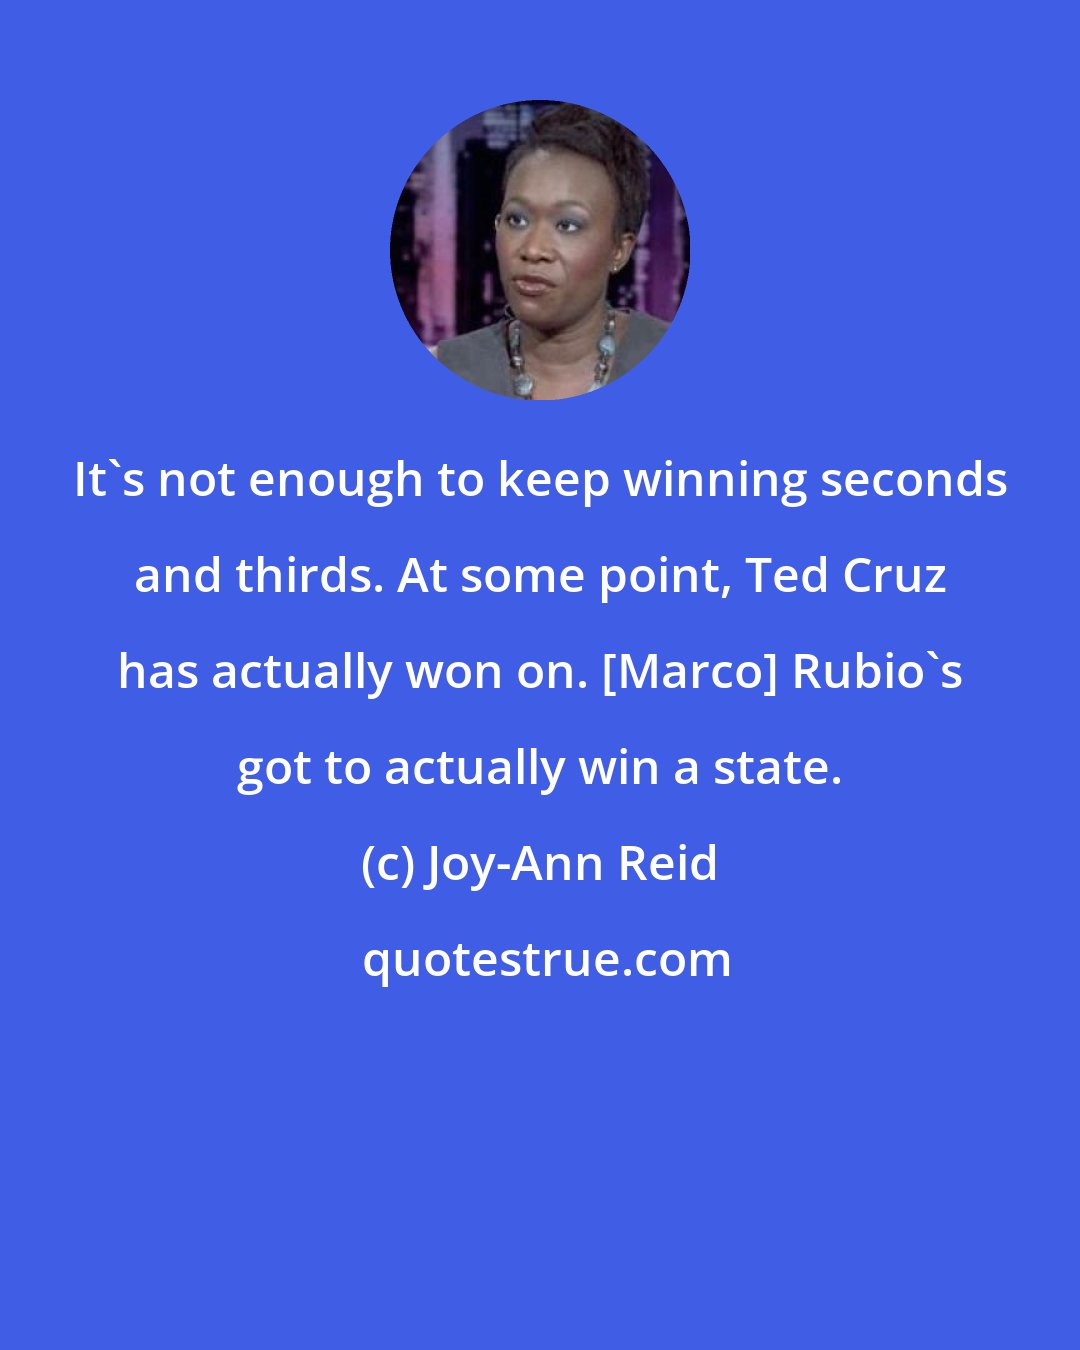 Joy-Ann Reid: It's not enough to keep winning seconds and thirds. At some point, Ted Cruz has actually won on. [Marco] Rubio's got to actually win a state.